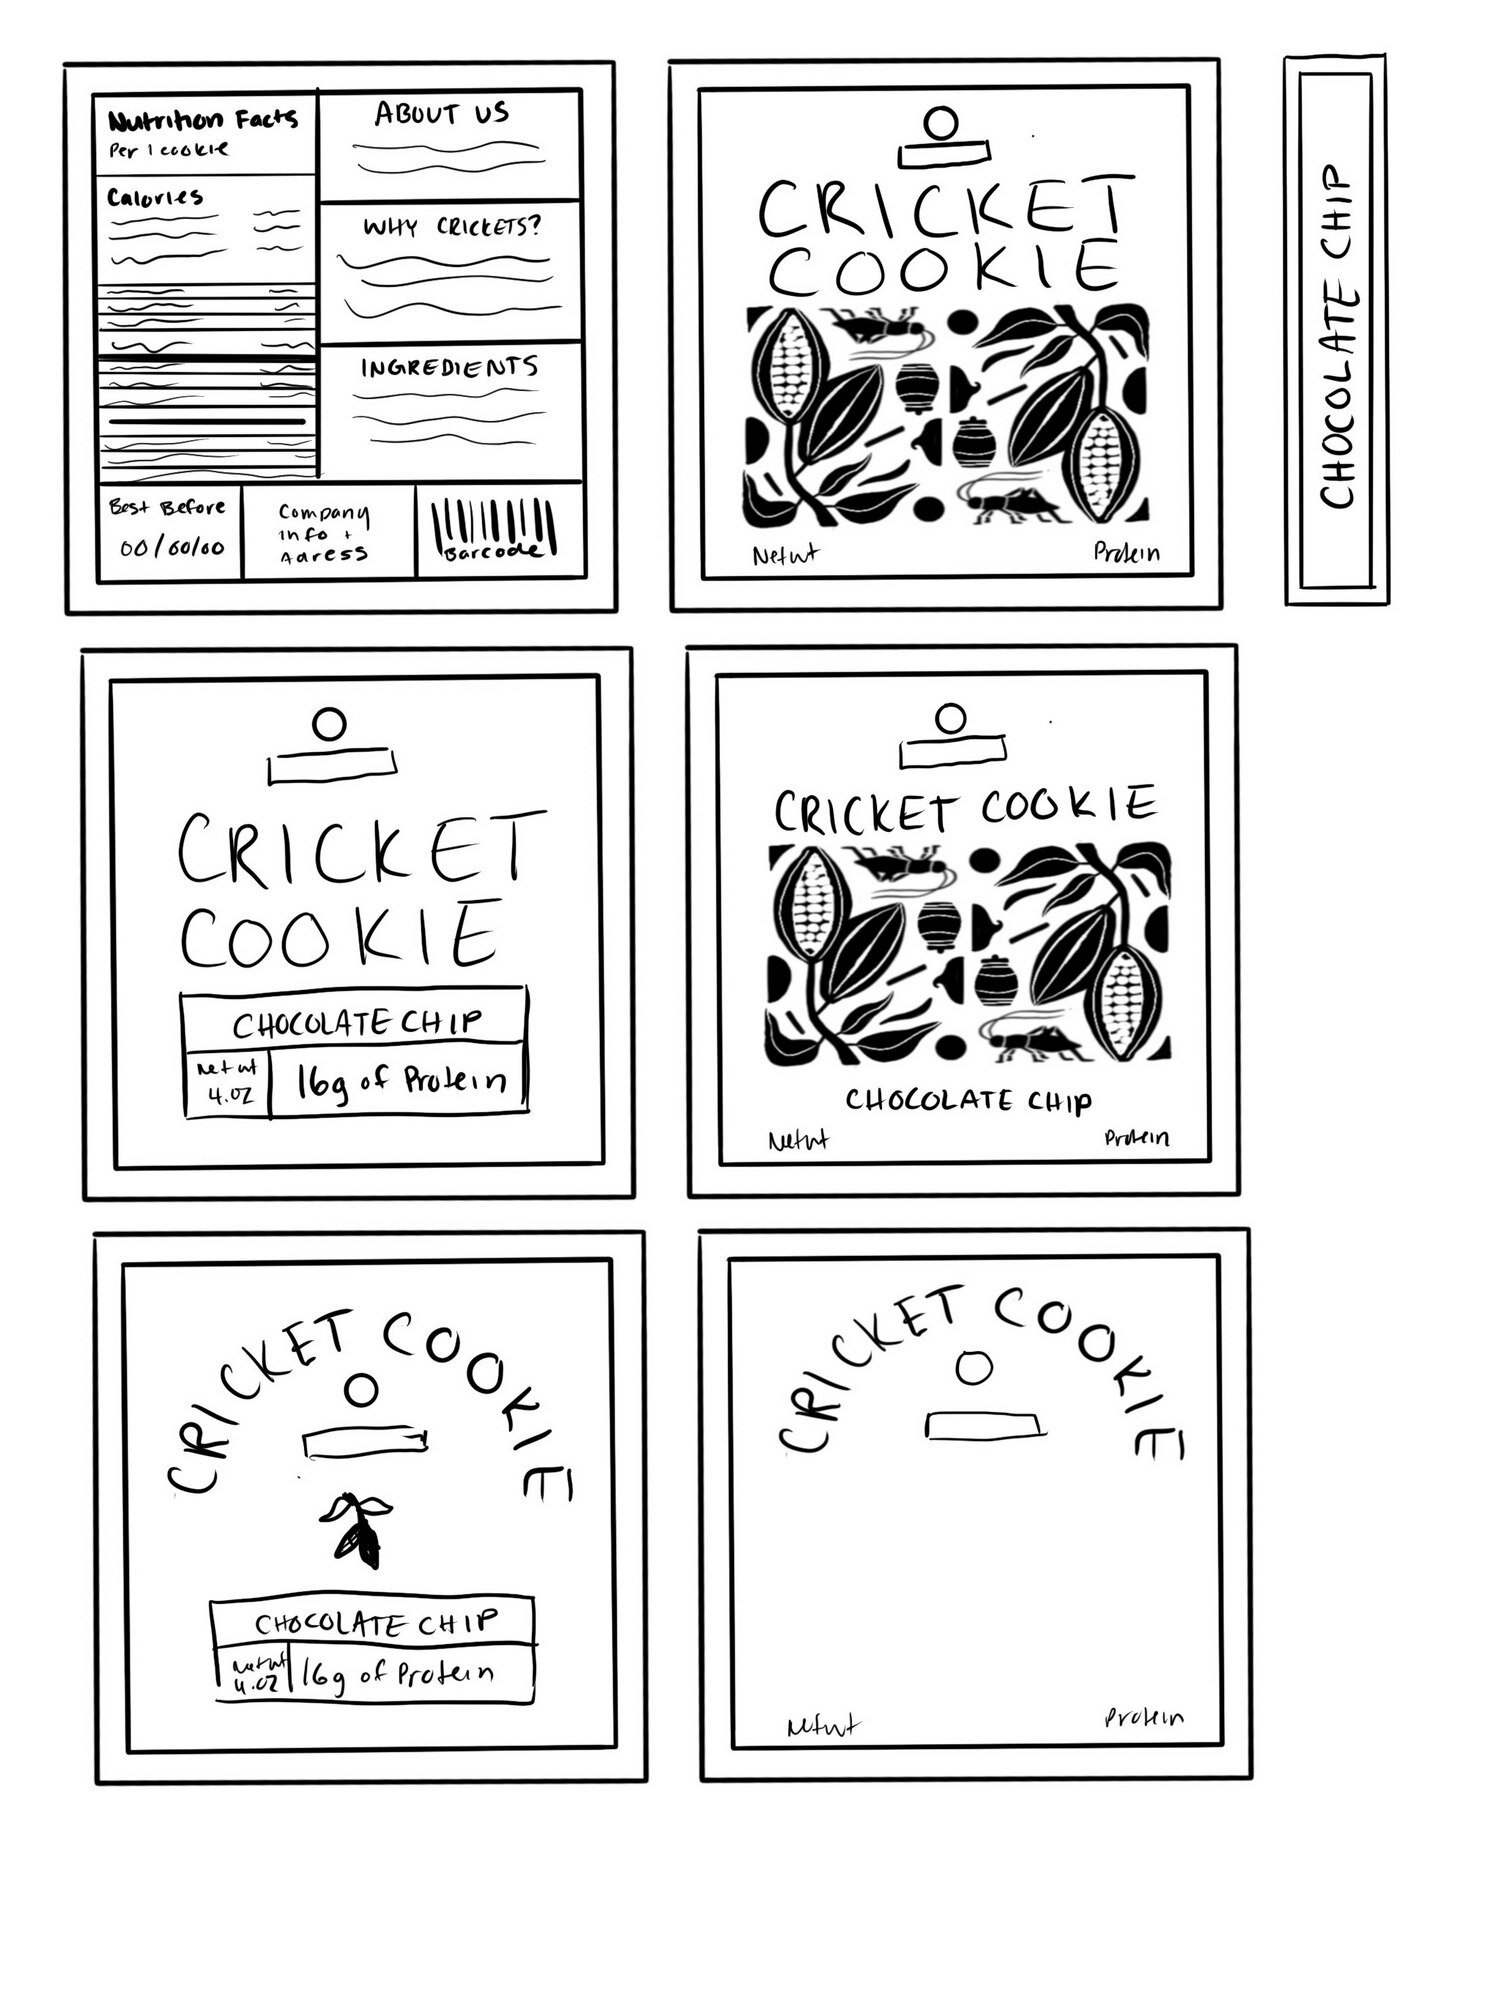  Packaging sketches 